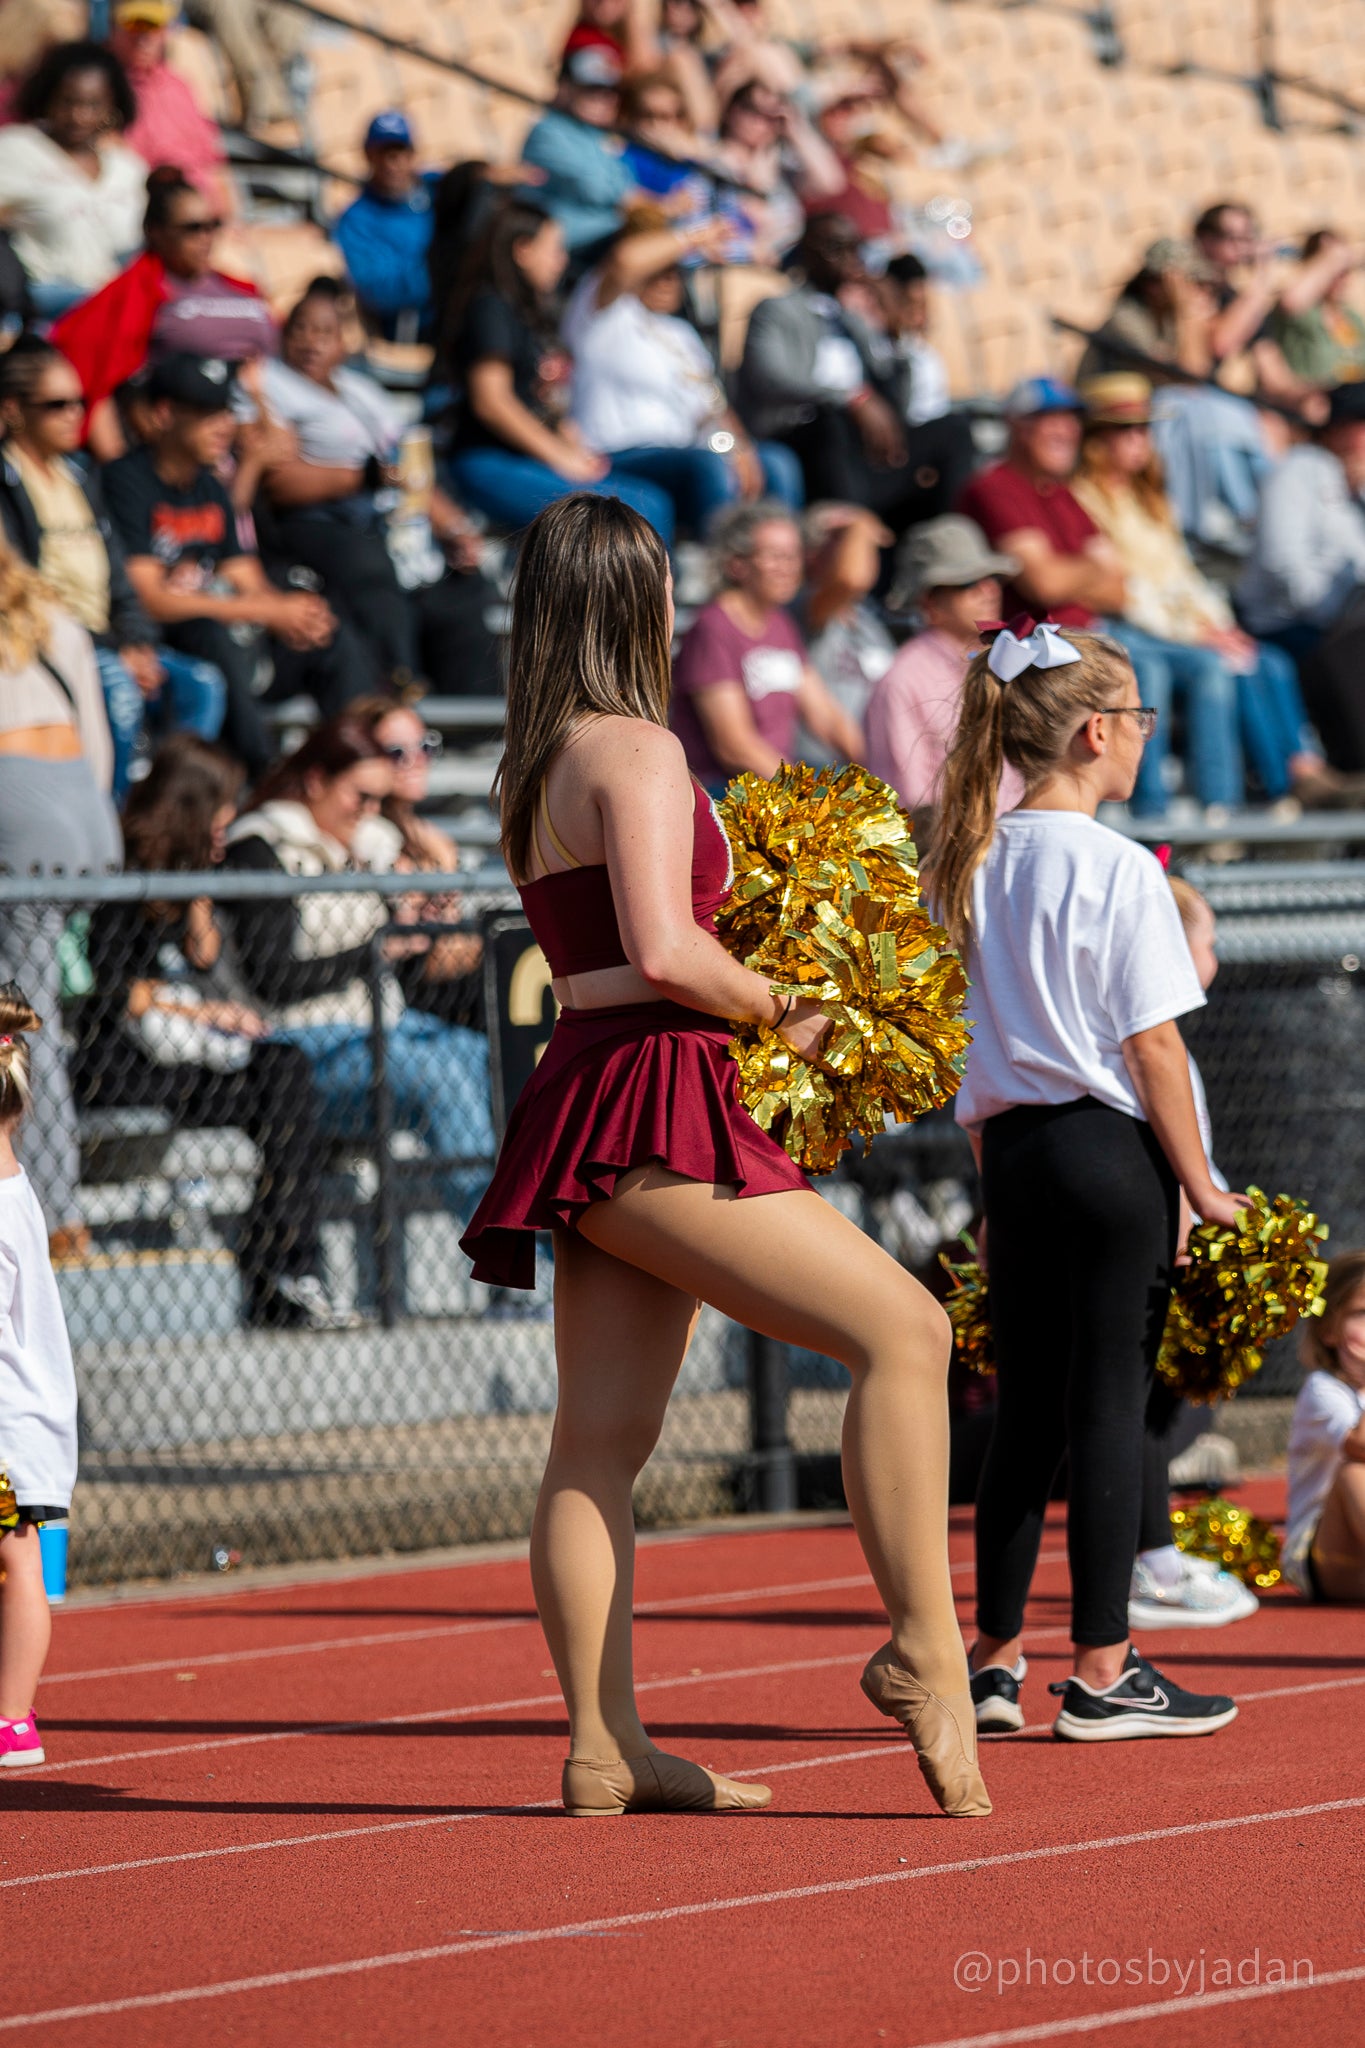 A member of Erskine's cheer team at a football game